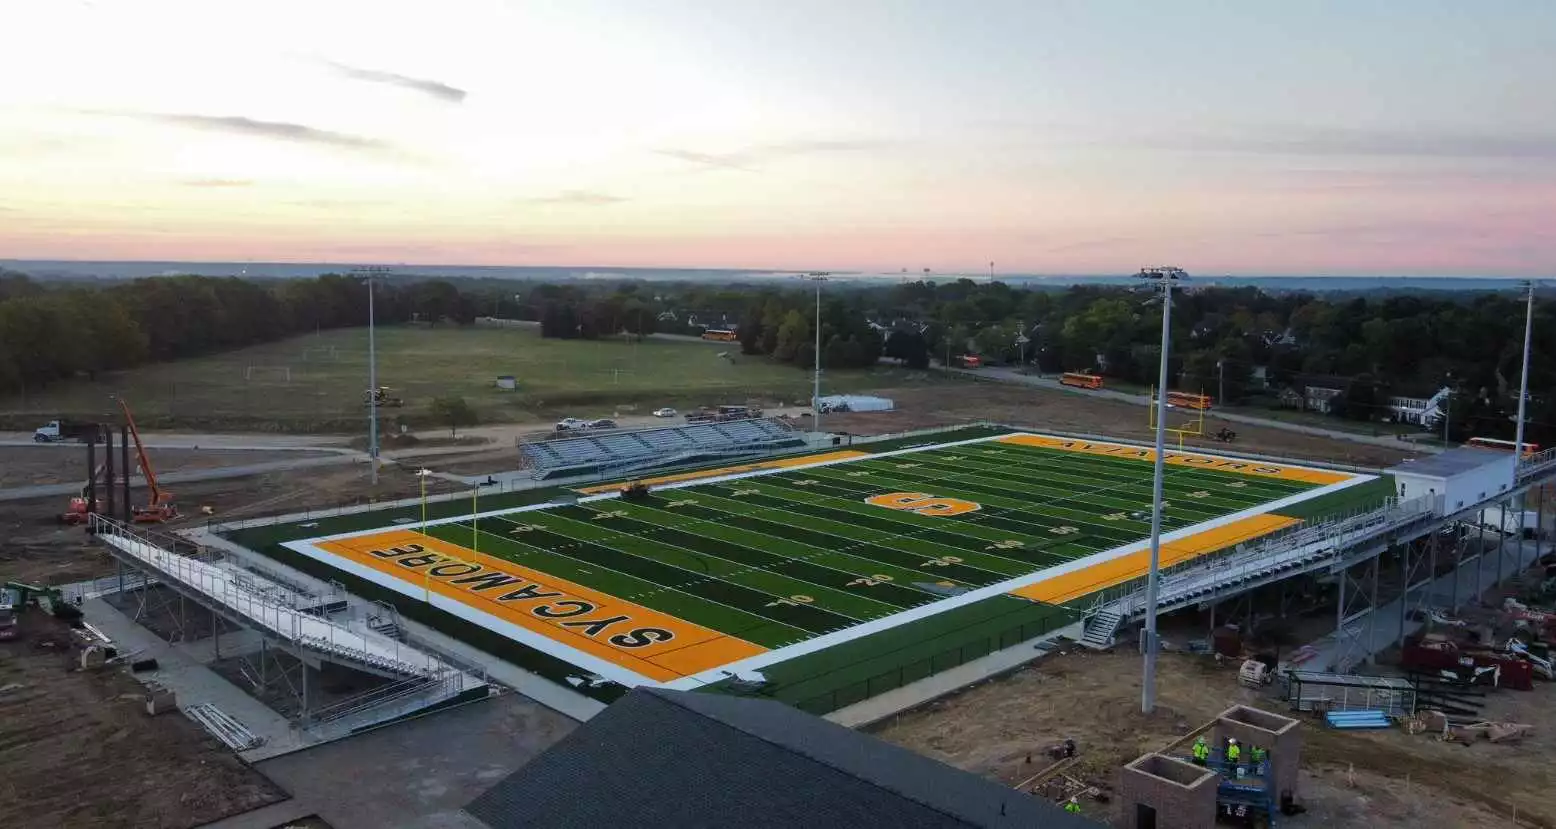 The Sycamore High School football field.